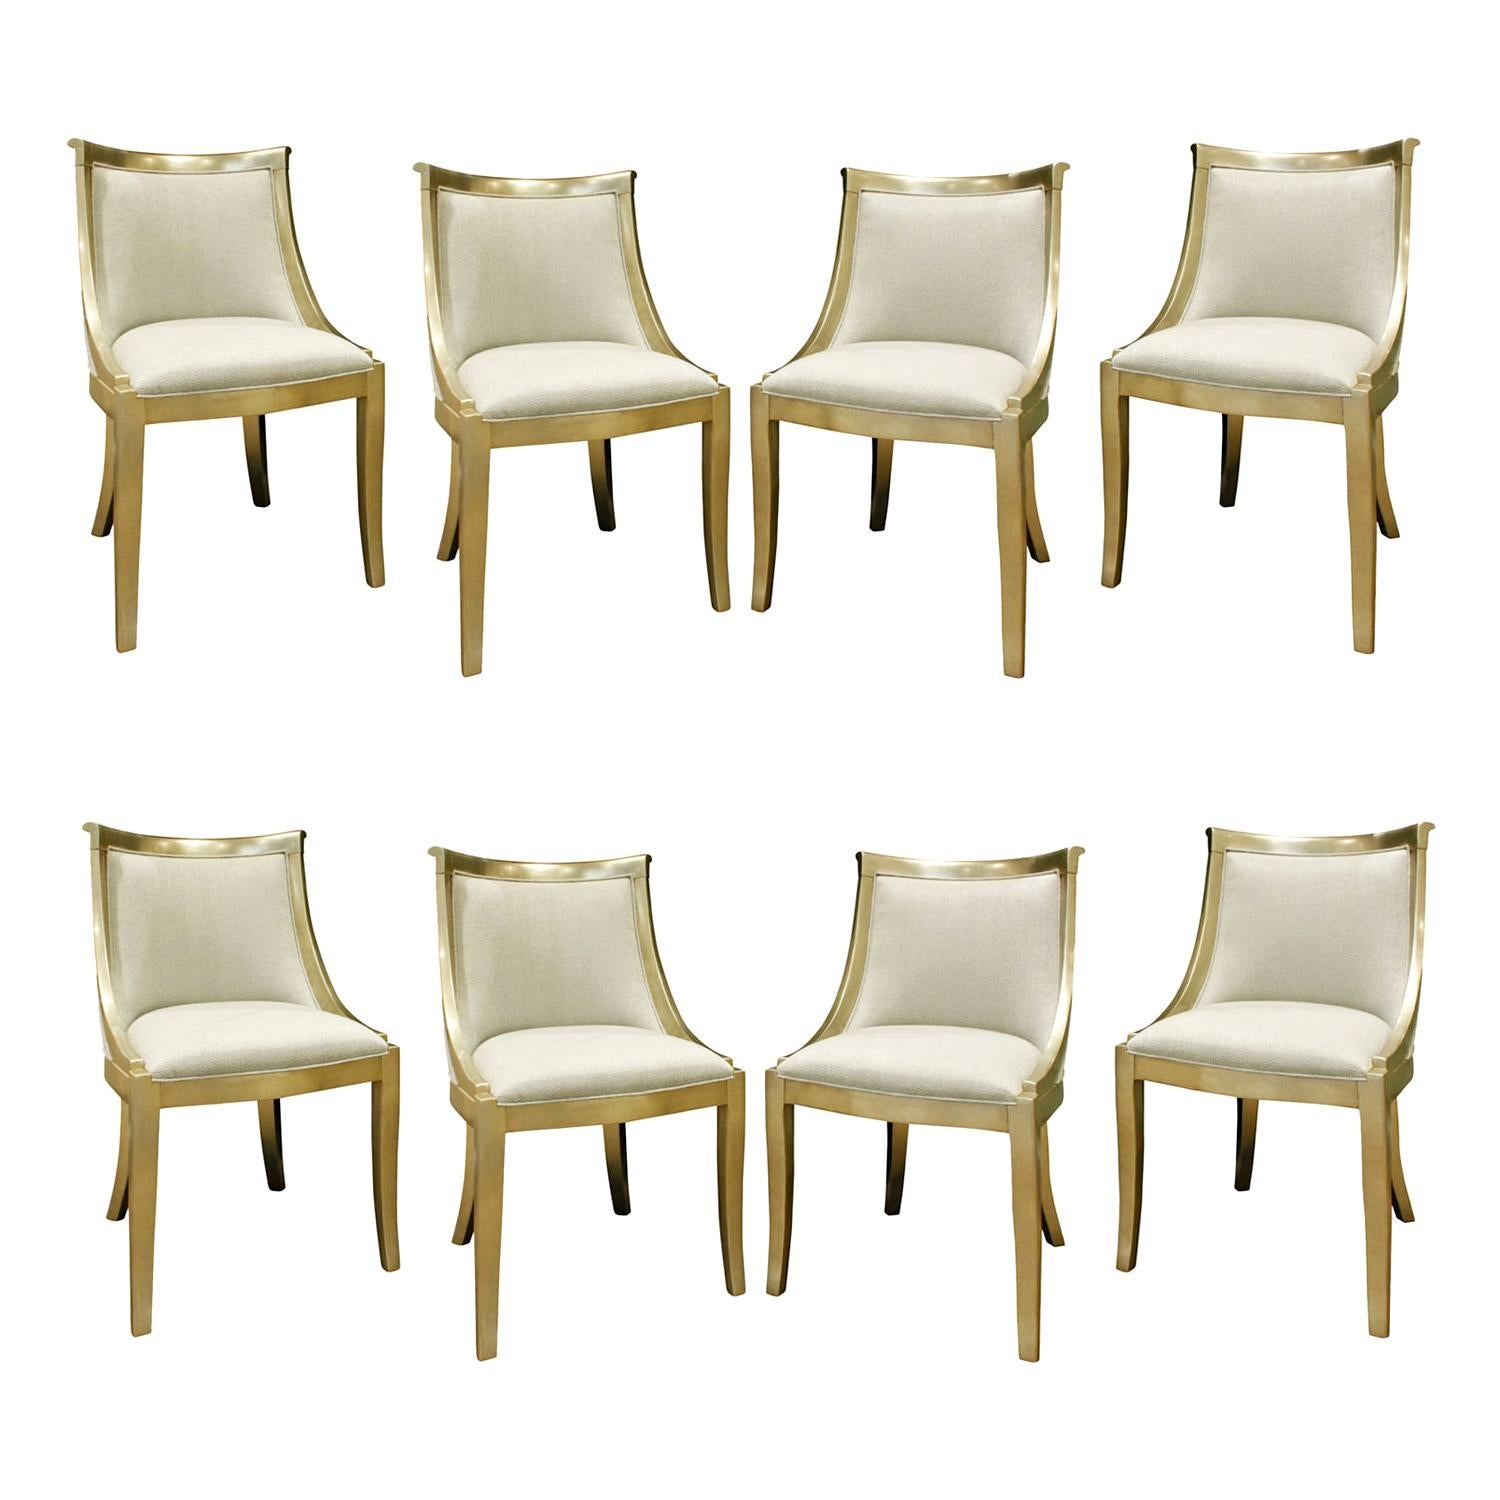 Set of 8 Chic Barrel Back Dining Chairs with Silver Leaf Frames, 1970s